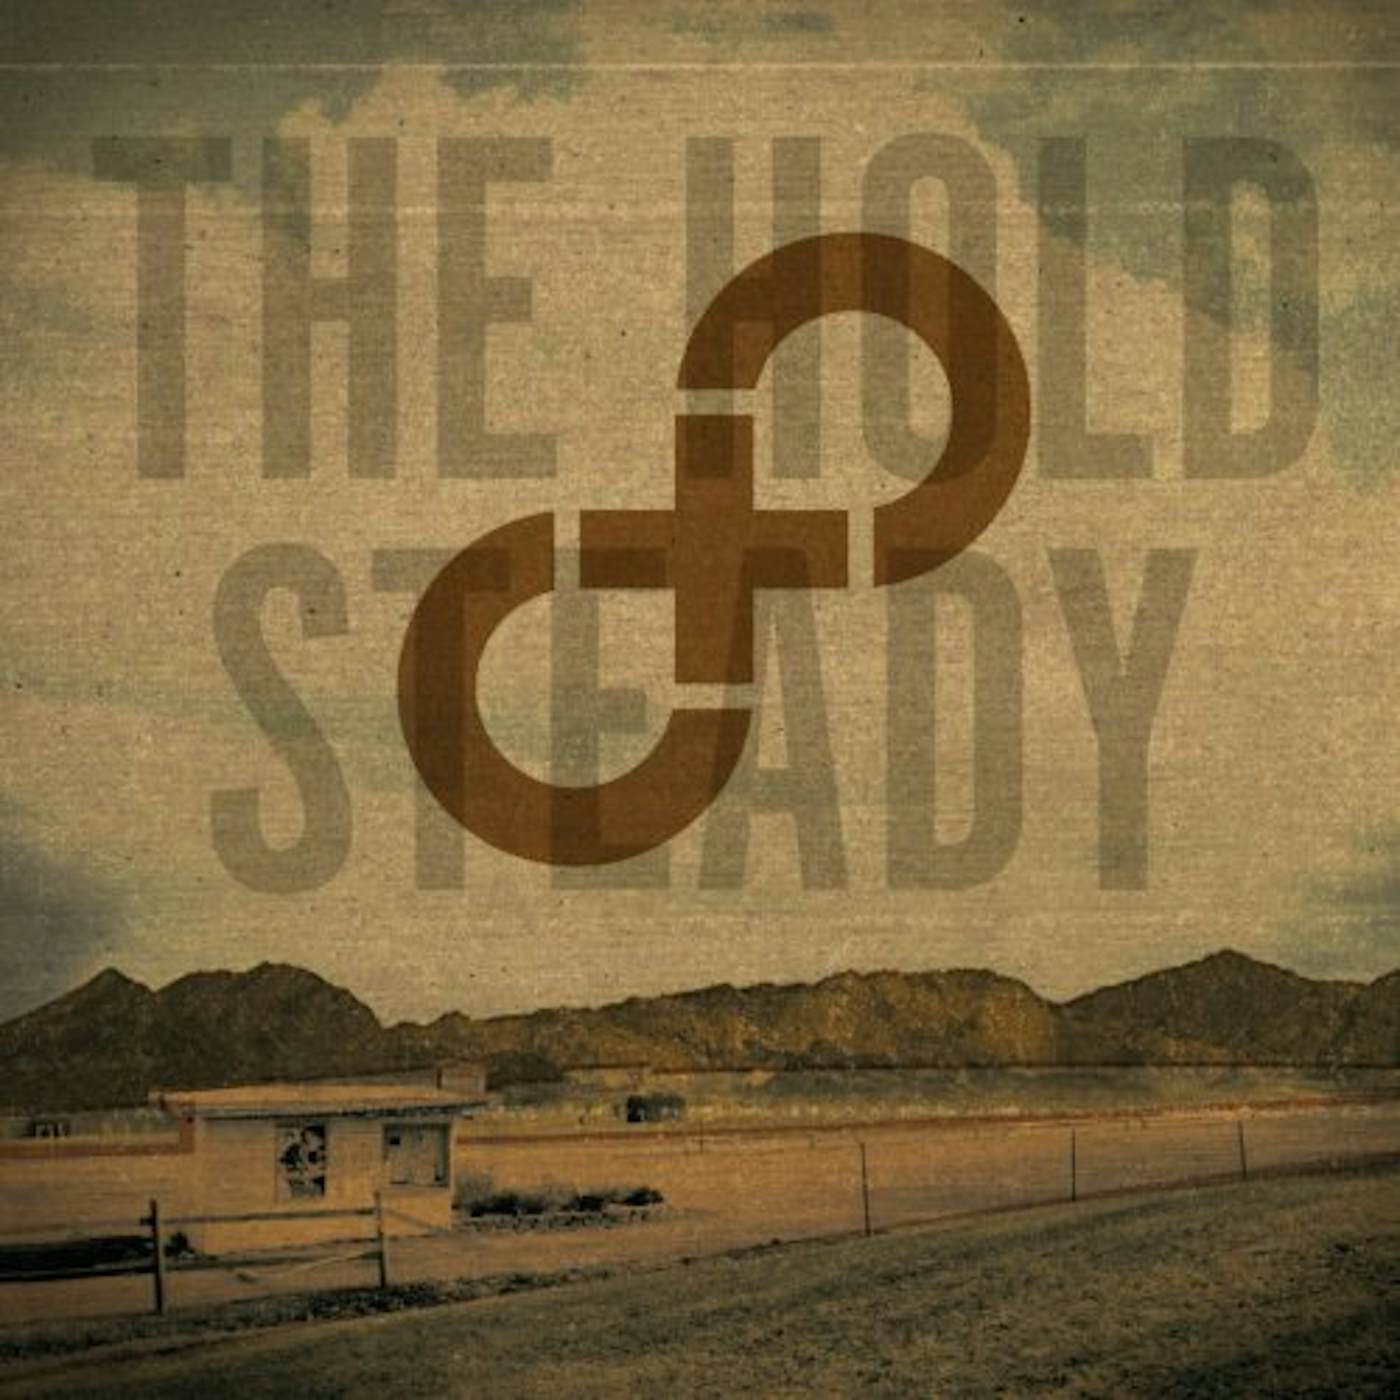 The Hold Steady STAY POSITIVE CD